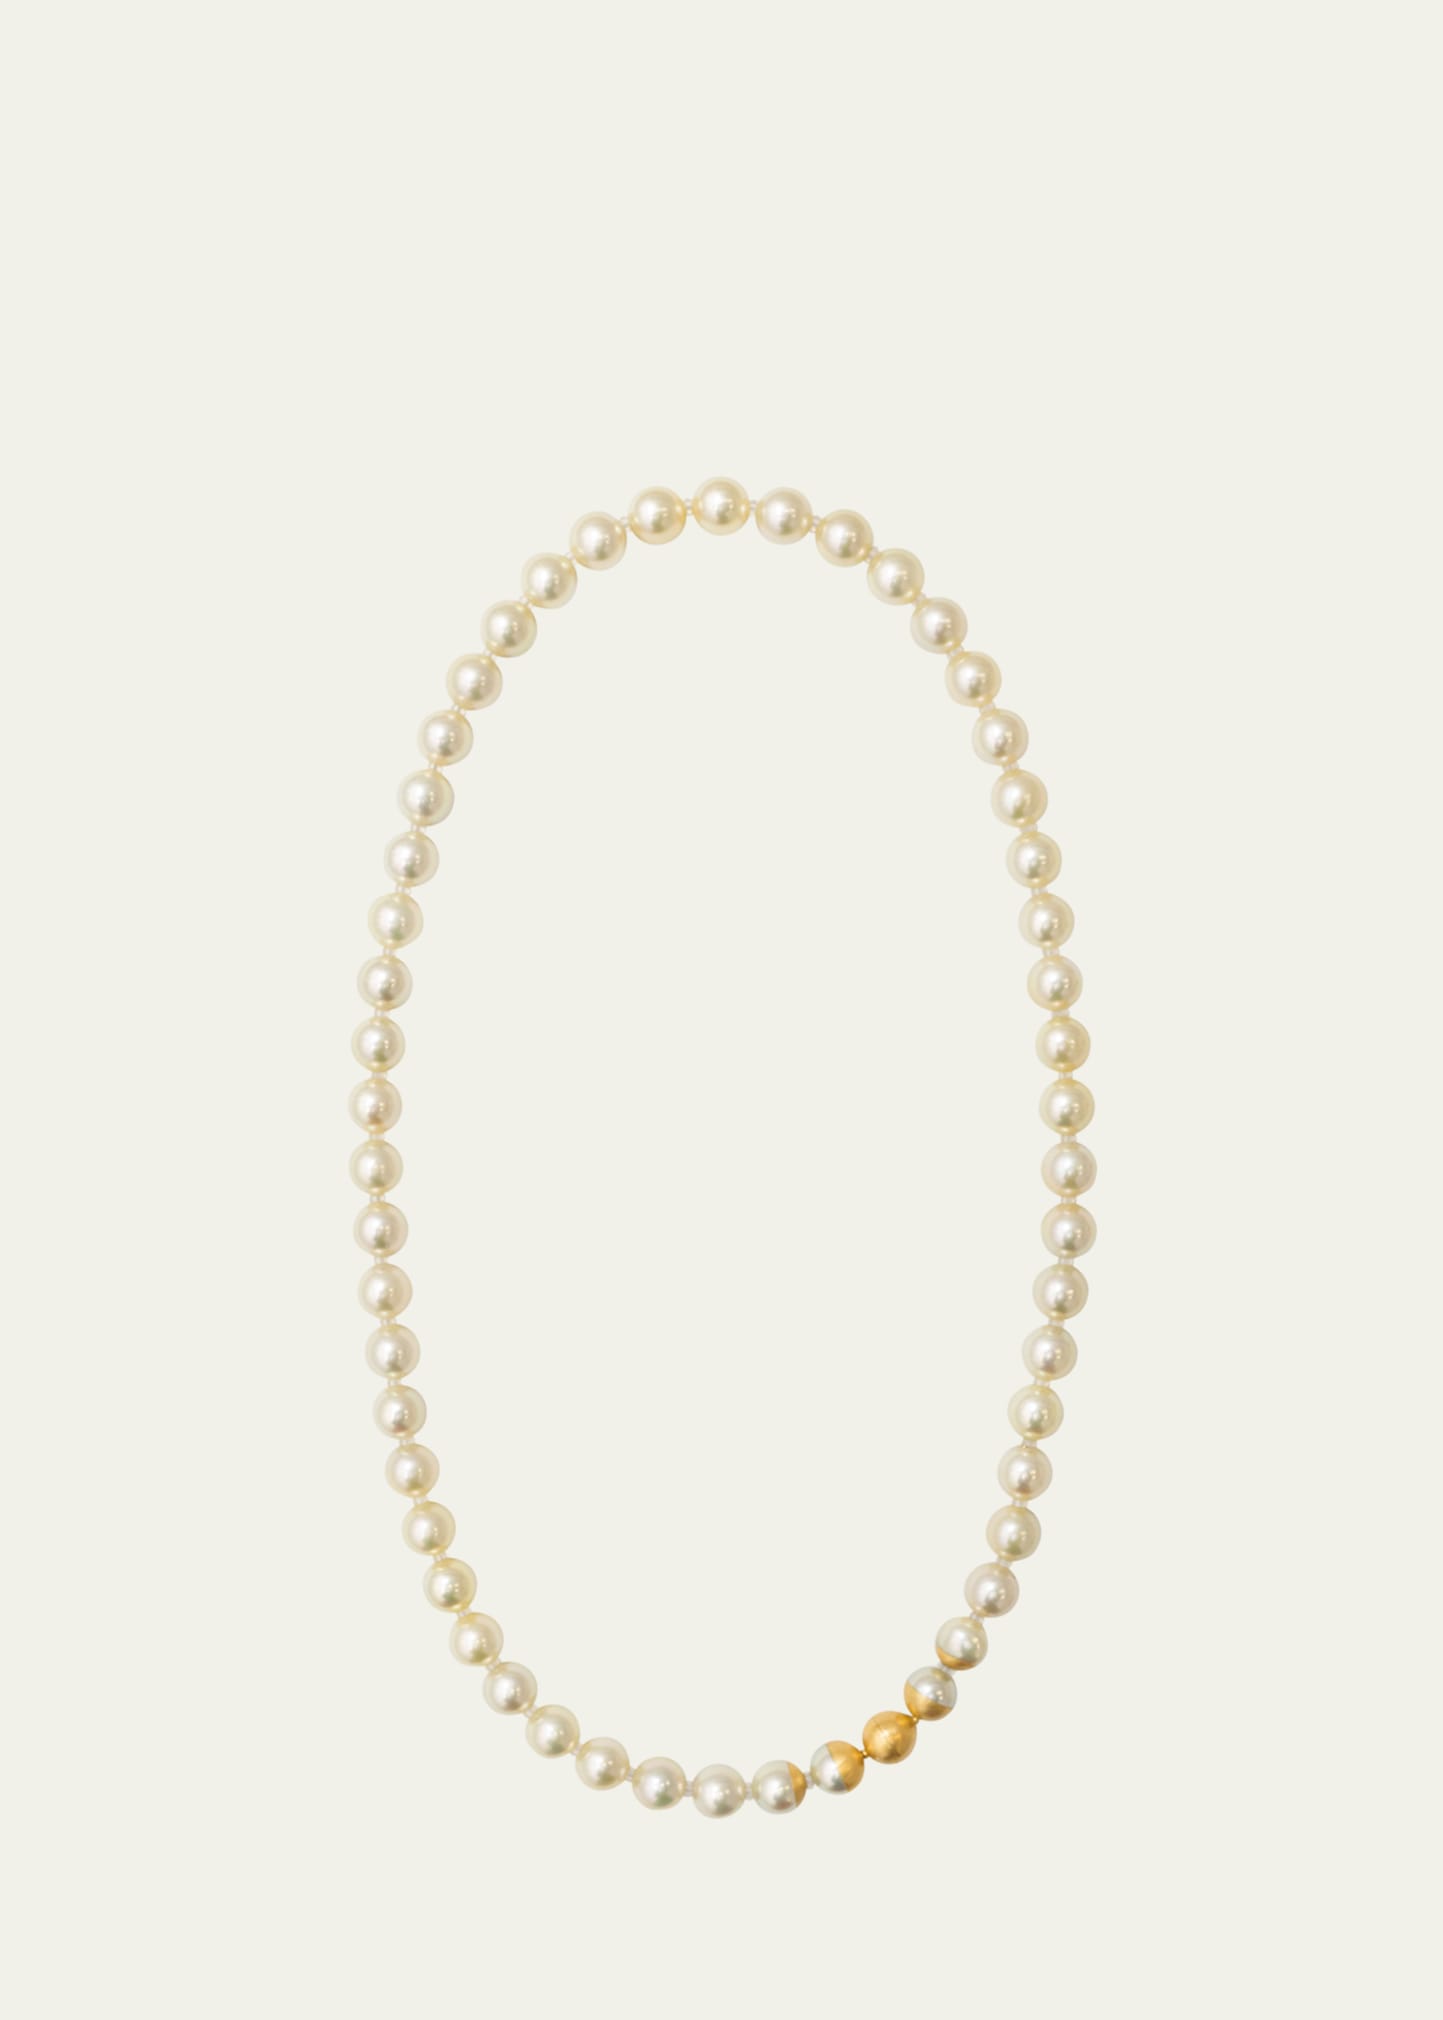 Yutai 18k Yellow Gold Sectional Pearl Necklace With Cultured Cream Akoya Pearls